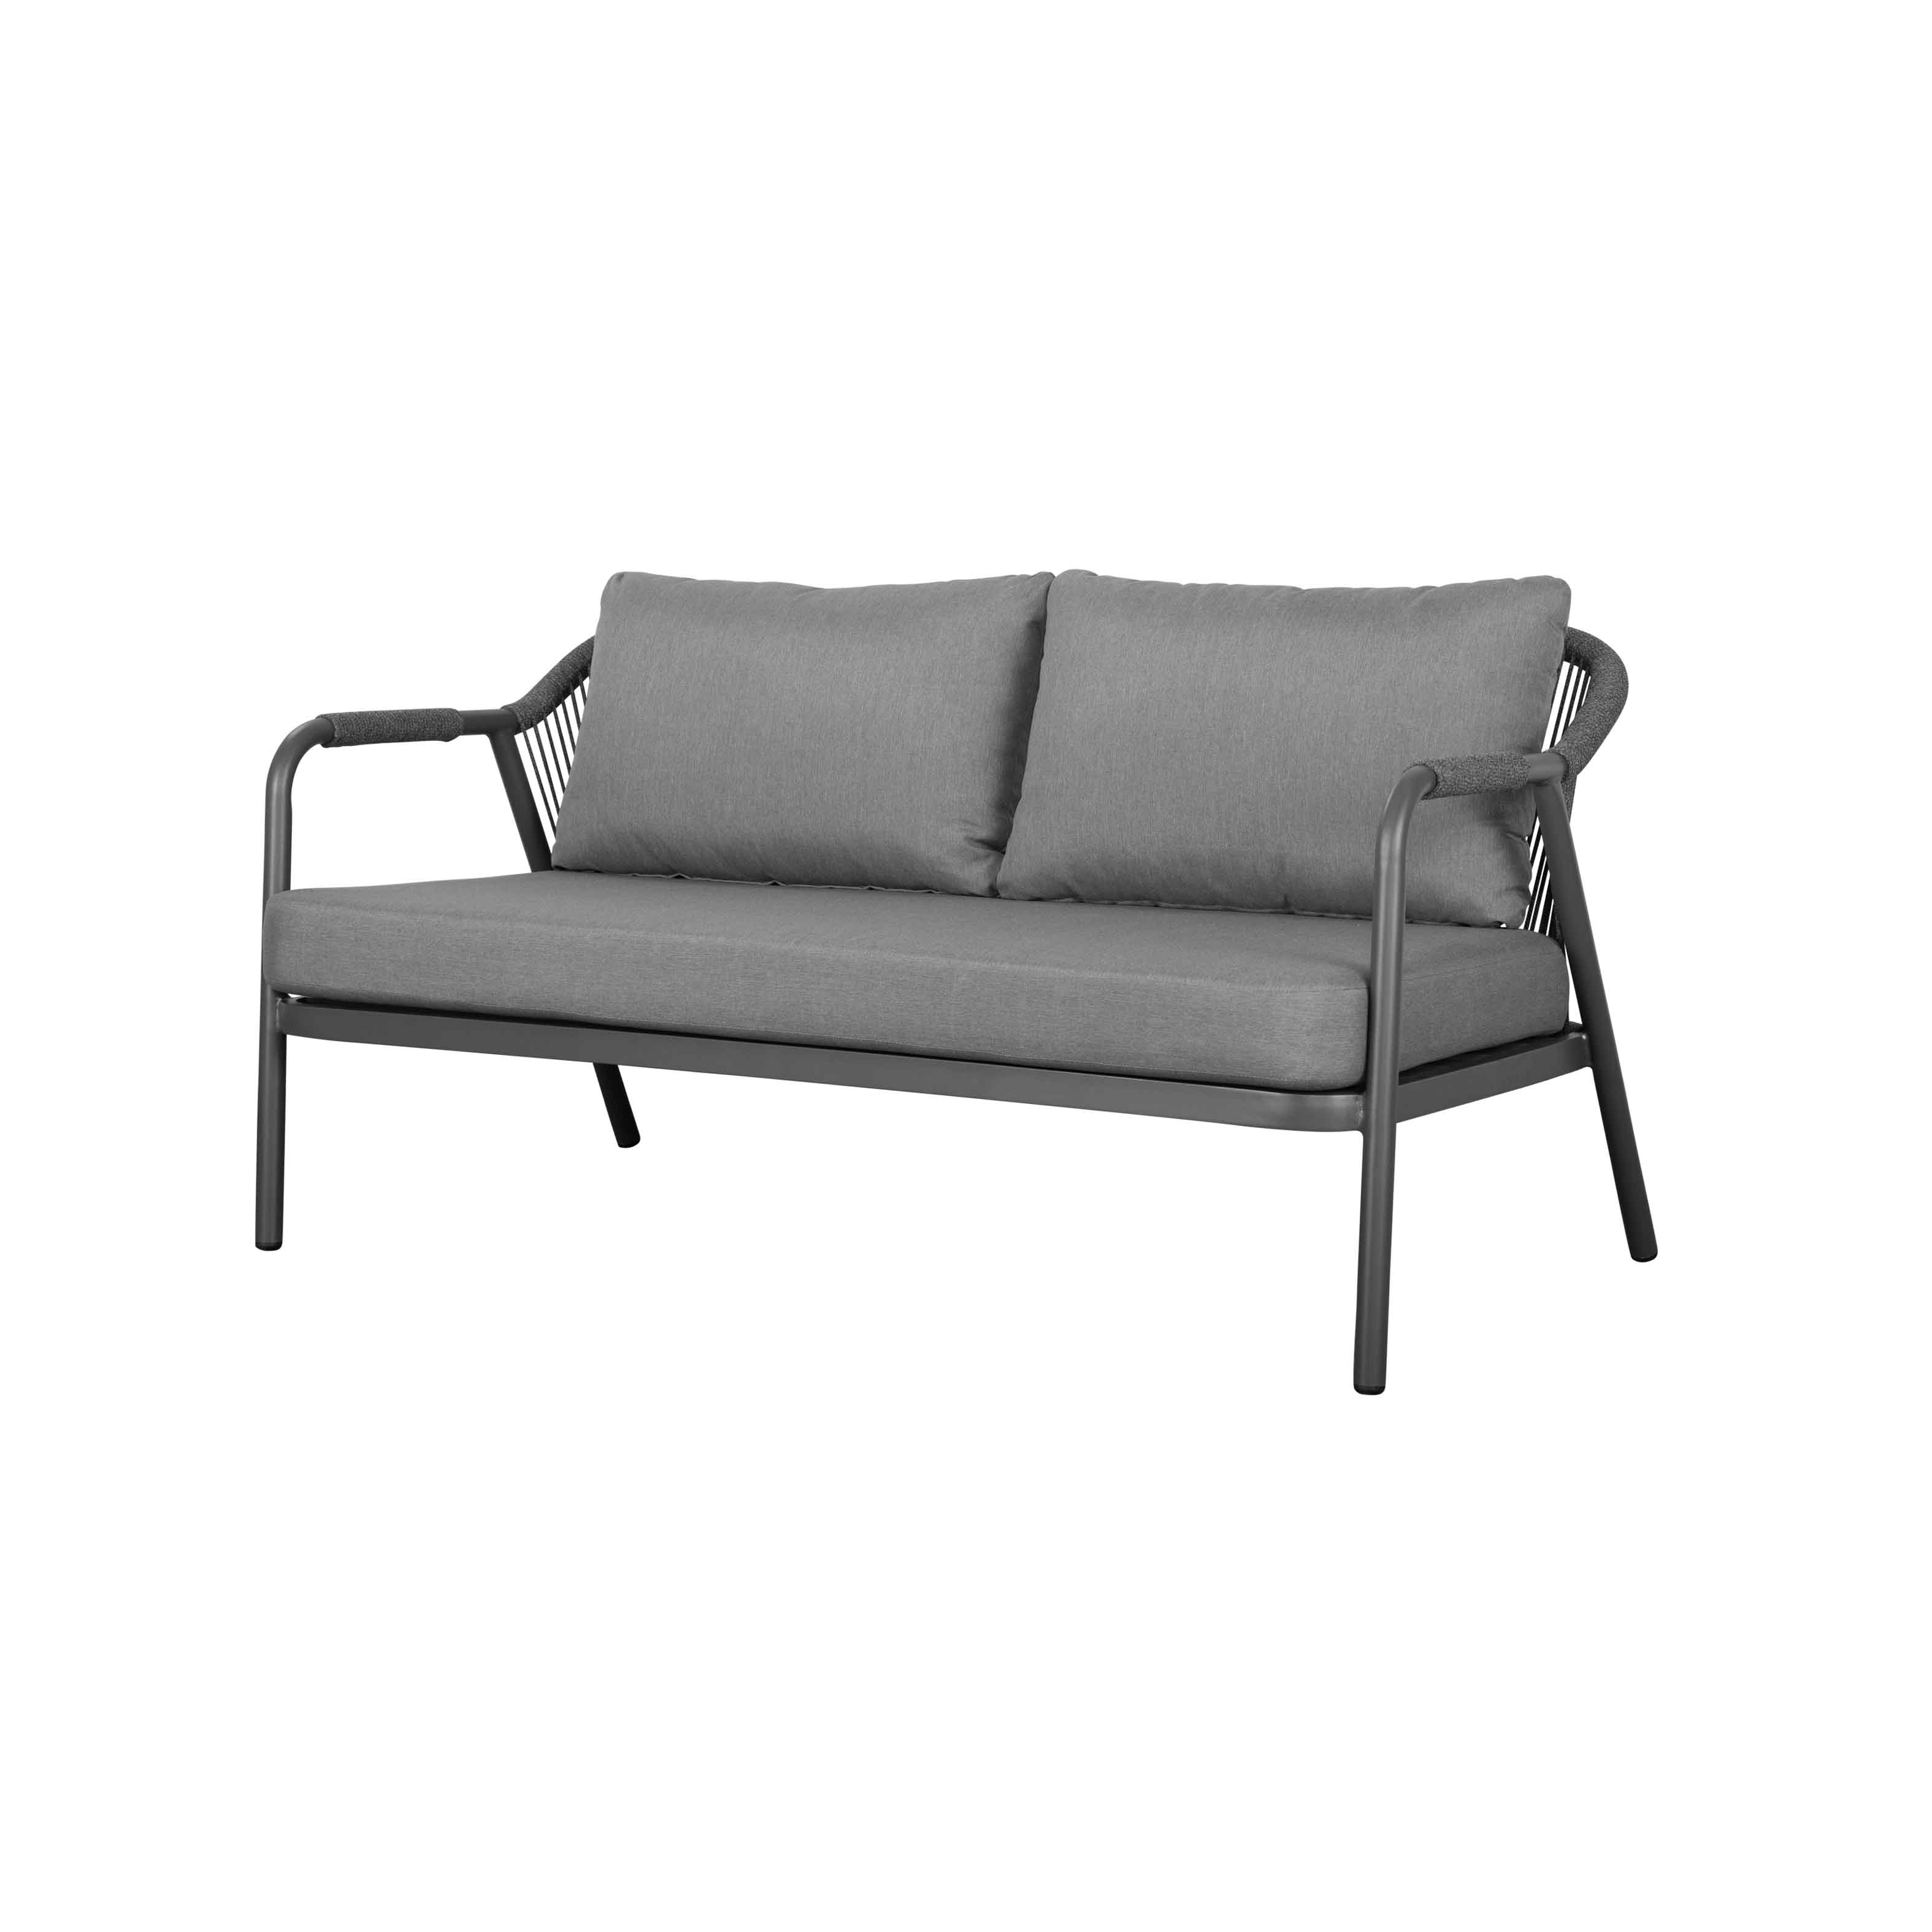 Roger rope 2-seat sofa S1